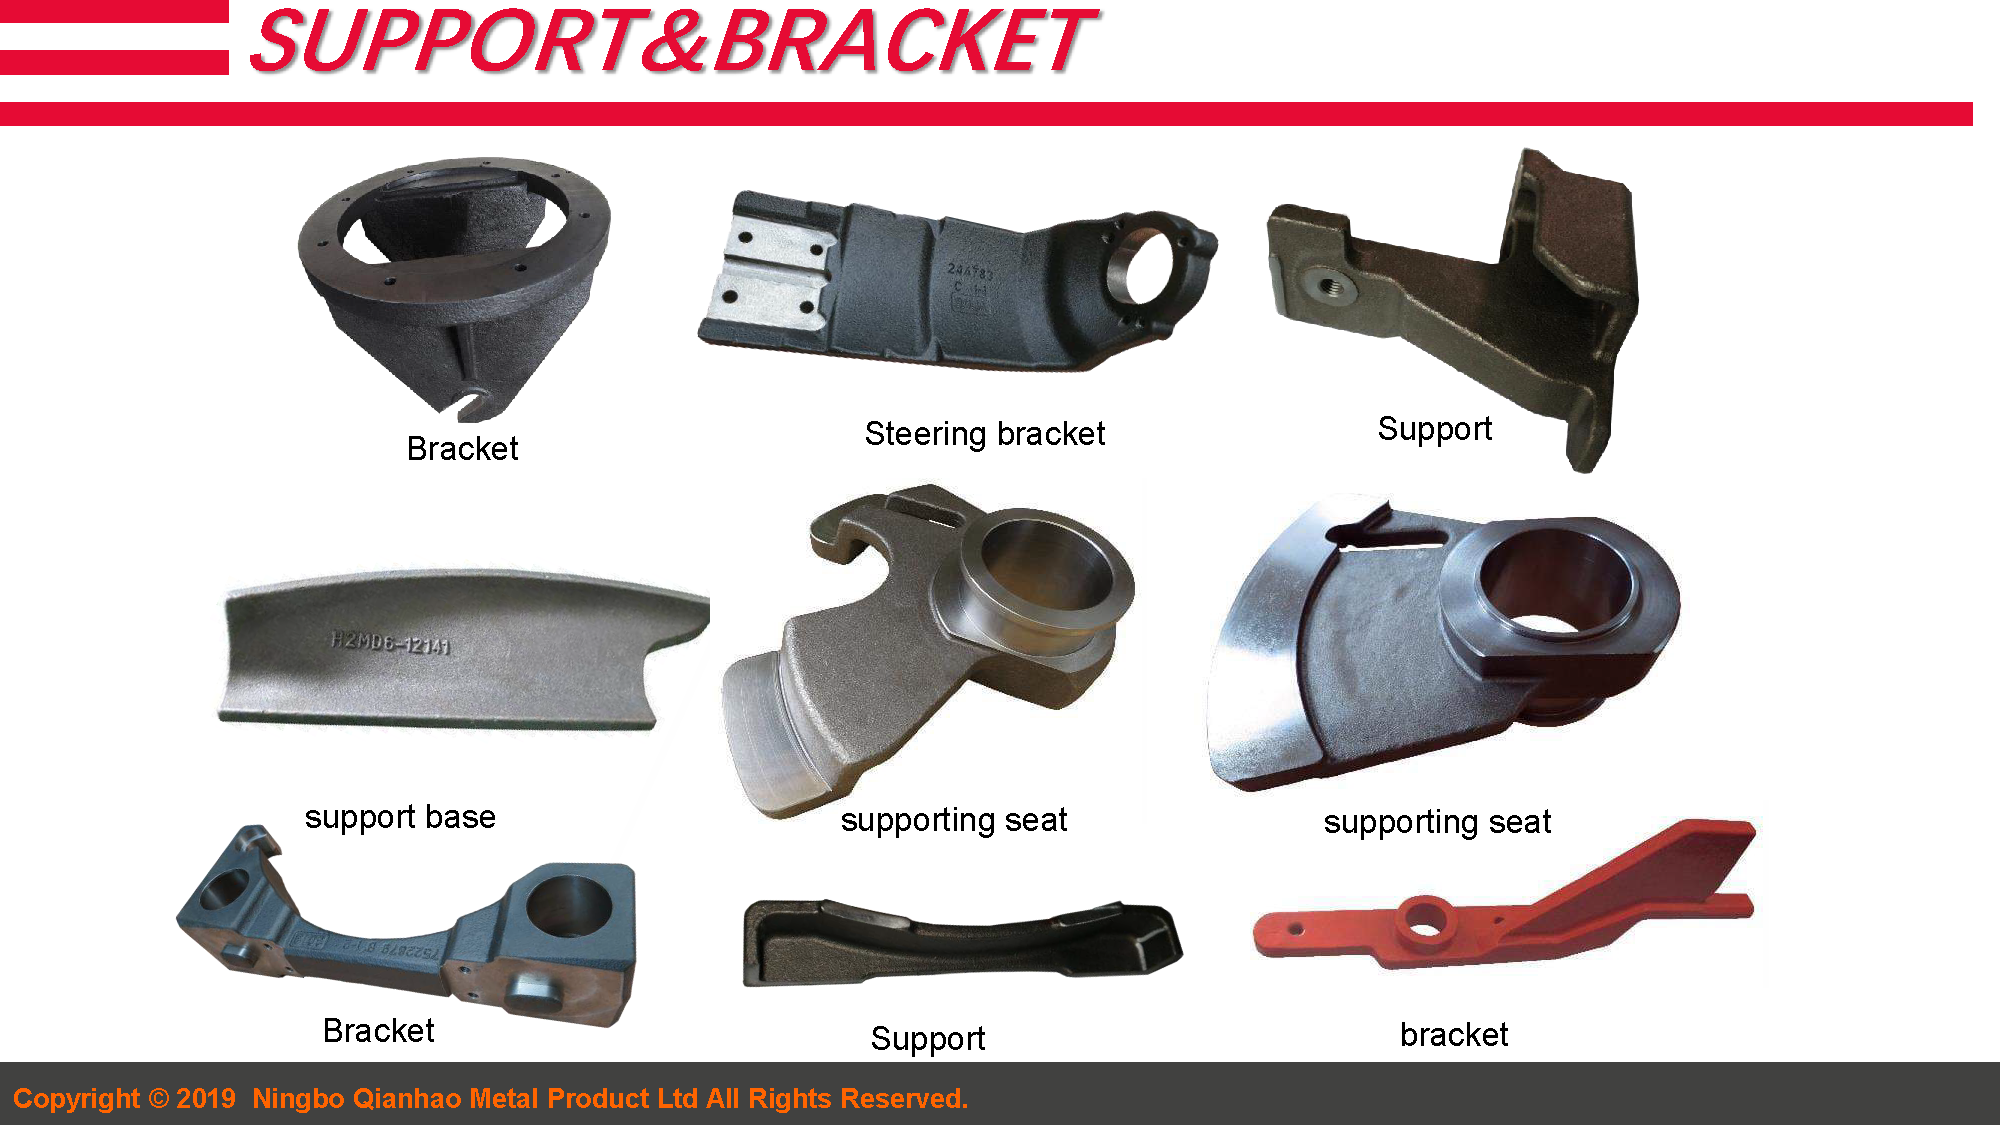 2.Forklift Components Capacity Introduction 19.4.9(图21)